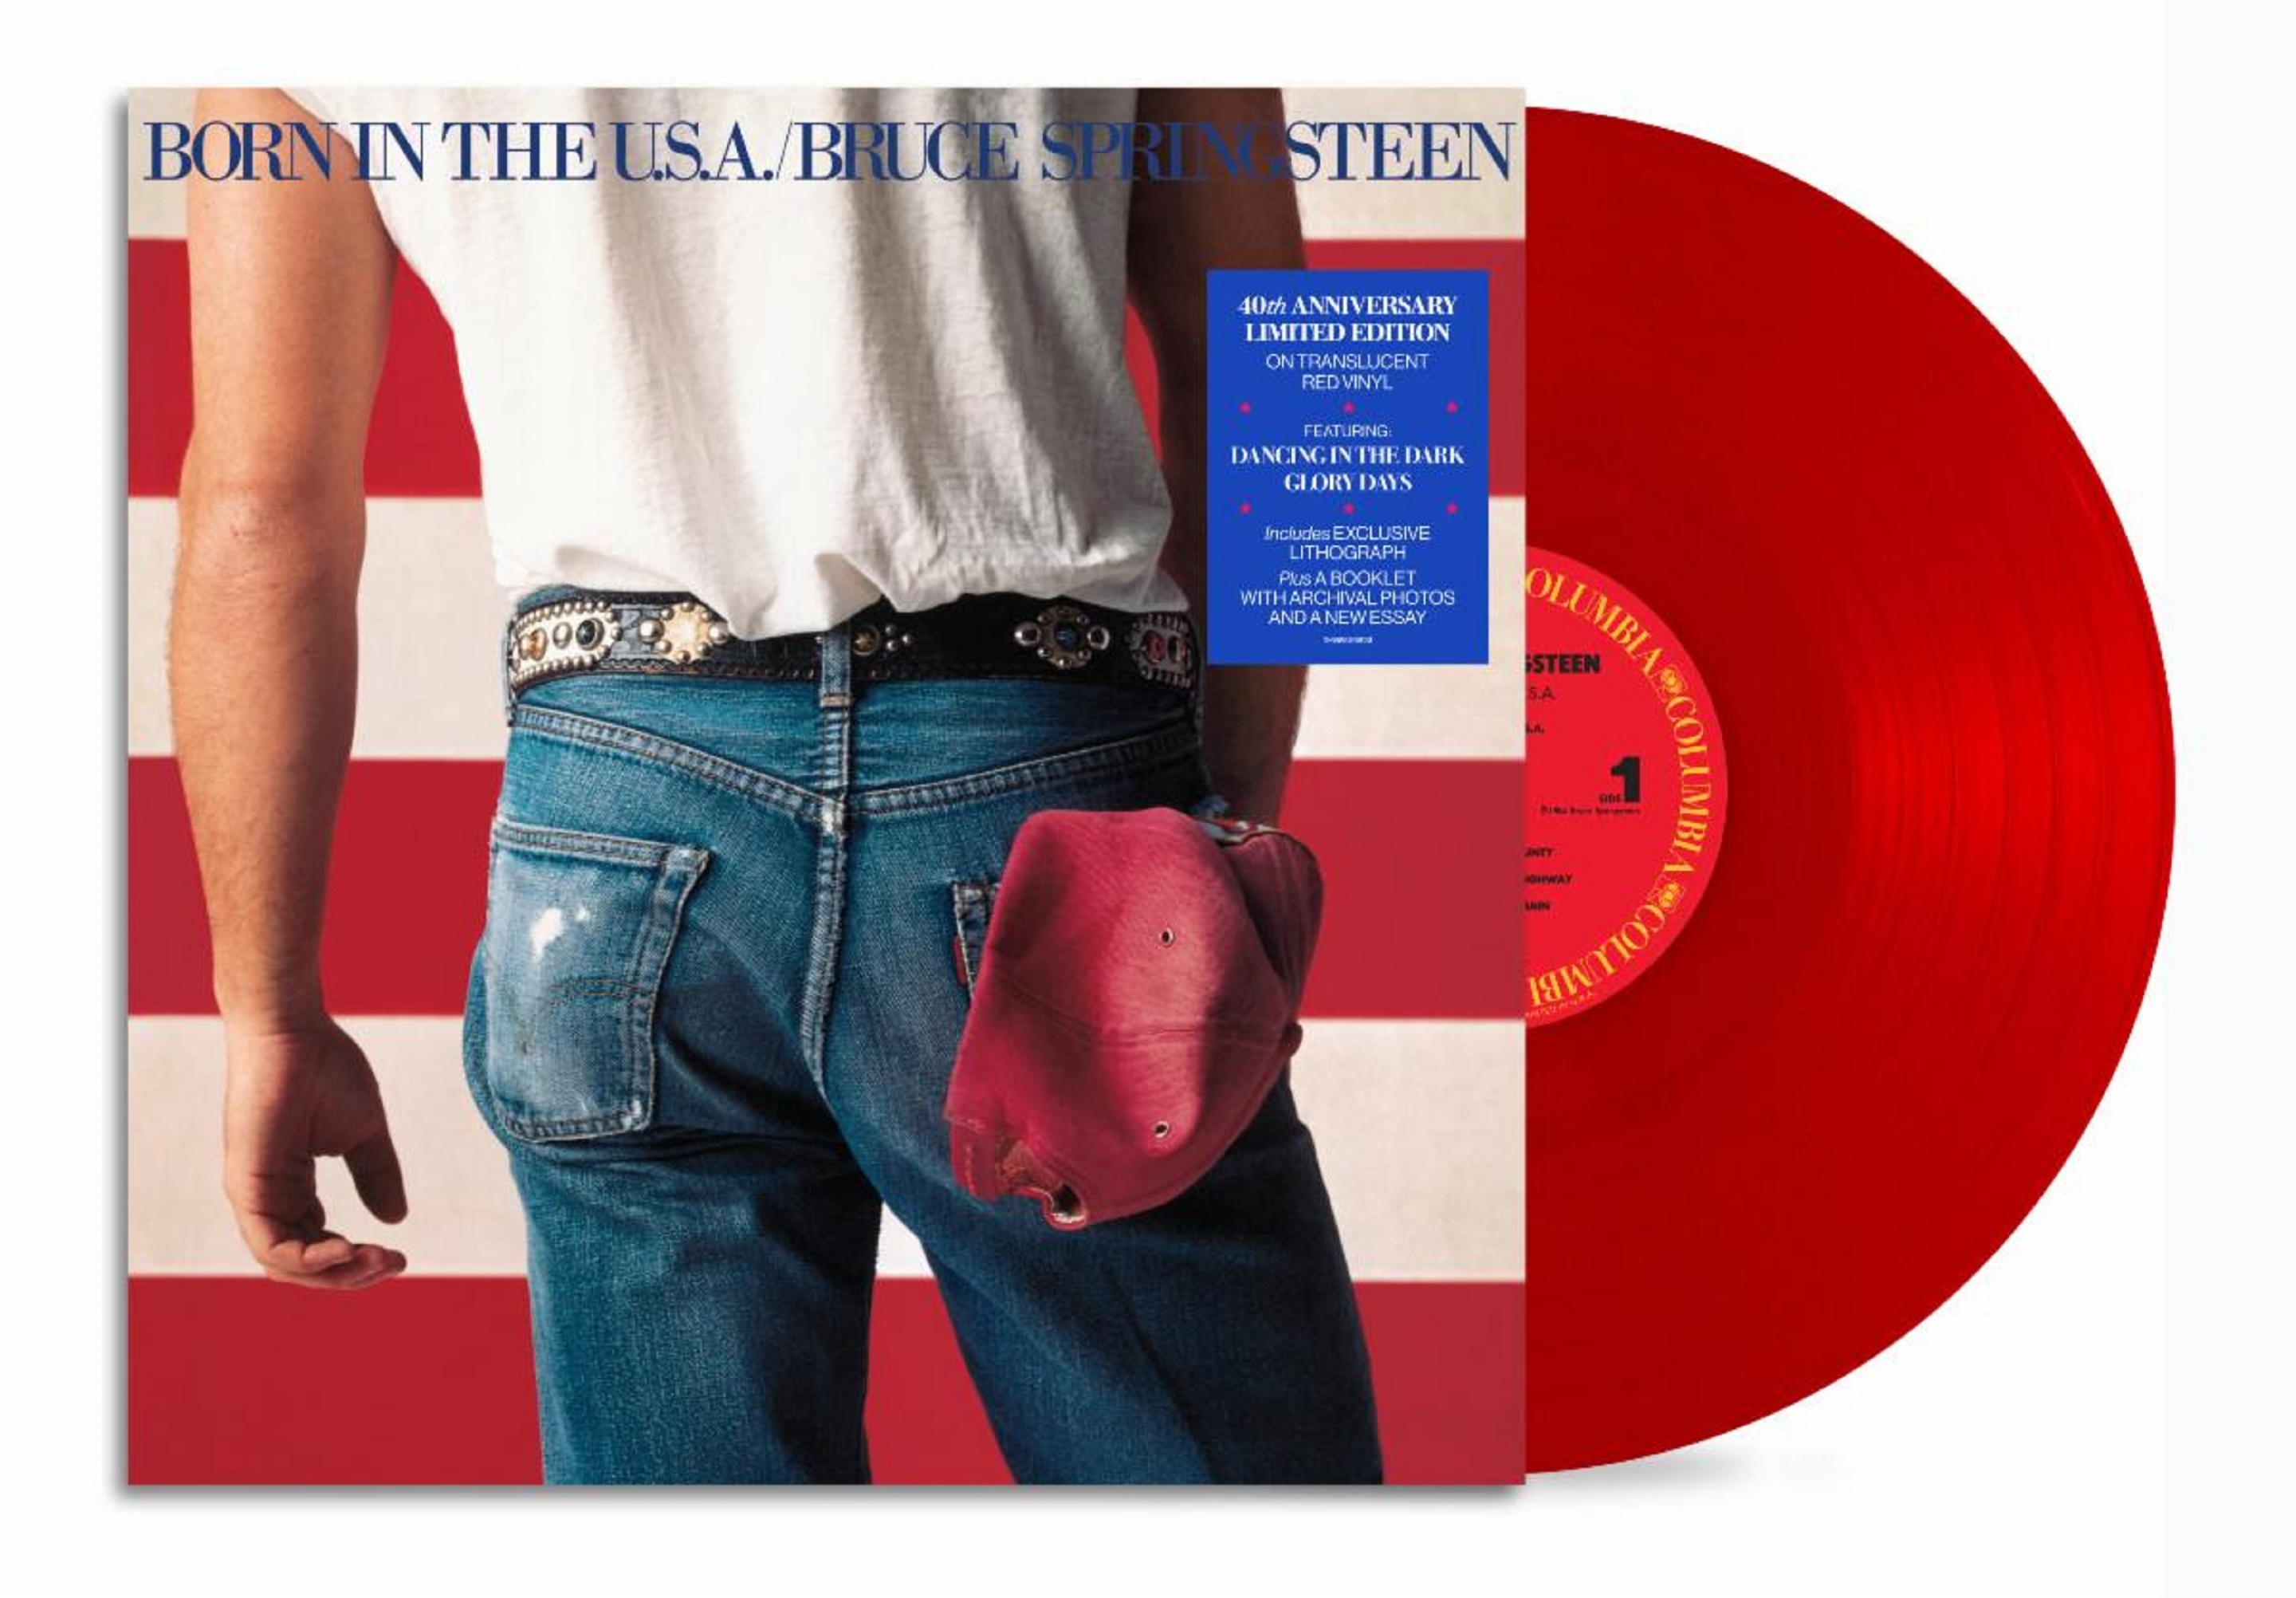 Sony Music celebrates Bruce Springsteen's 'Born In The U.S.A.' with 40th anniversary vinyl release coming June 14